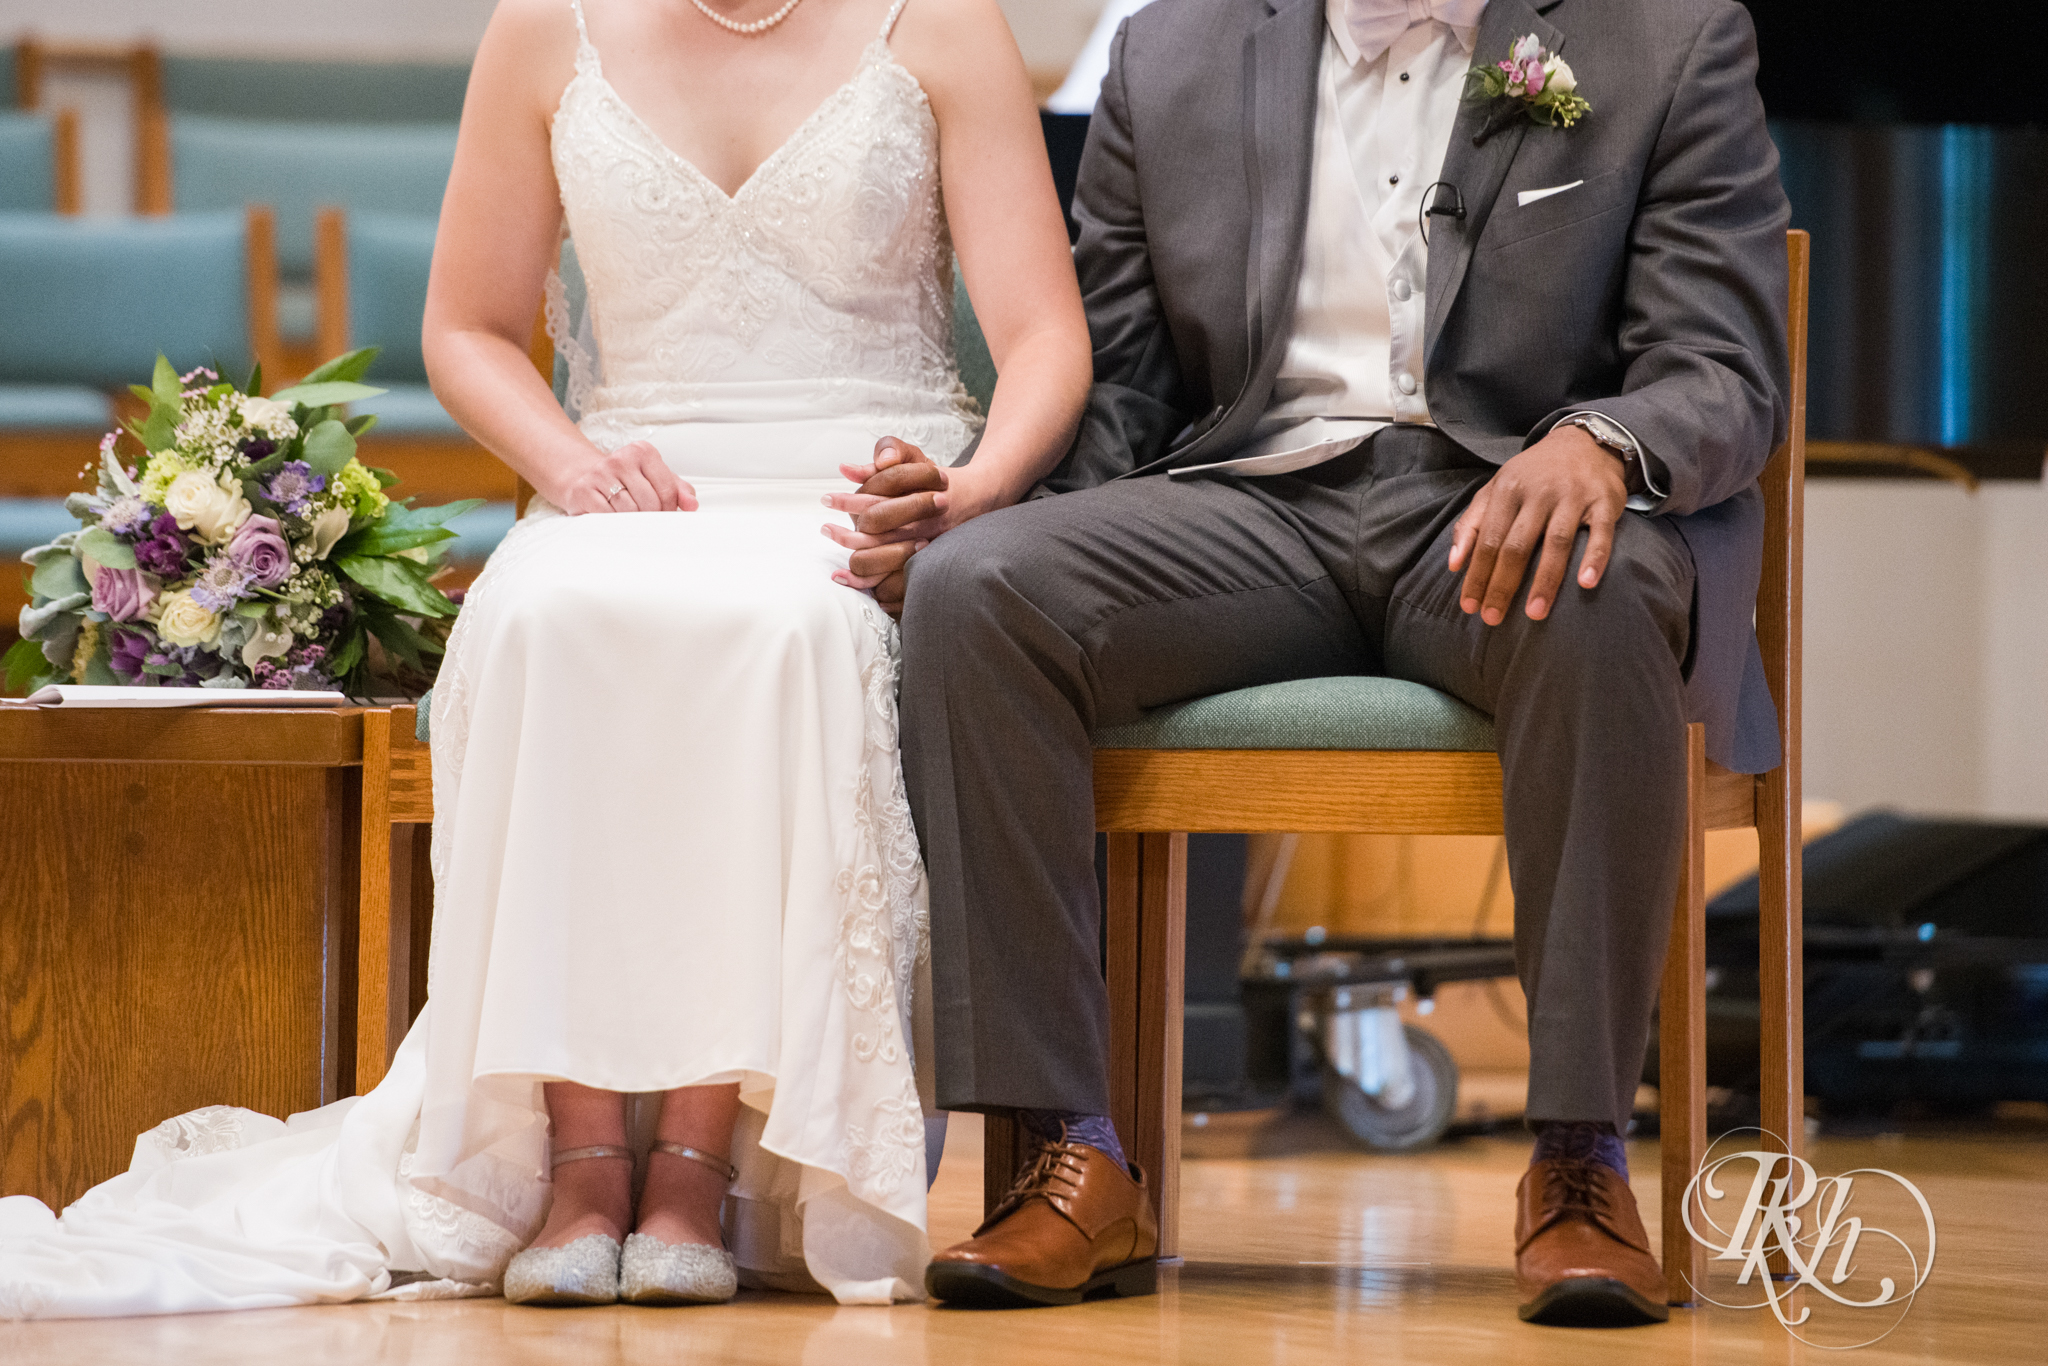 Black groom and white bride hold hands during wedding ceremony at church in Richfield, Minnesota.